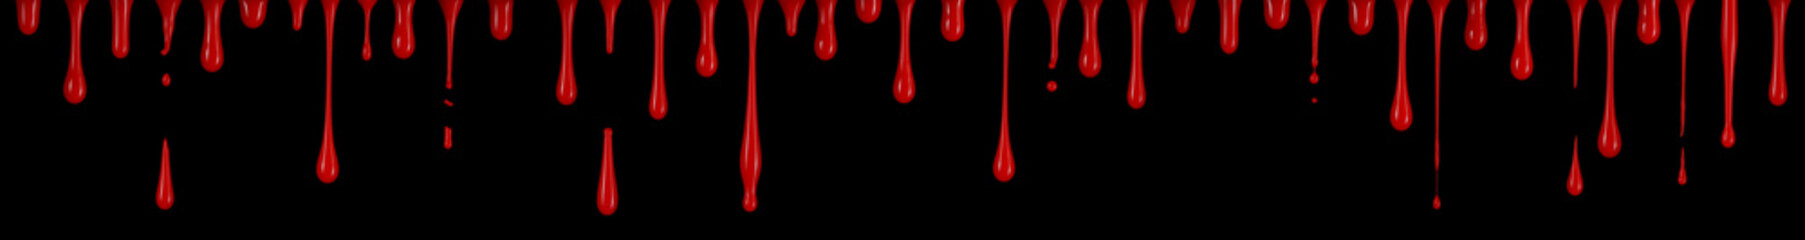 Row of several different blood drips and drops isolated on black.